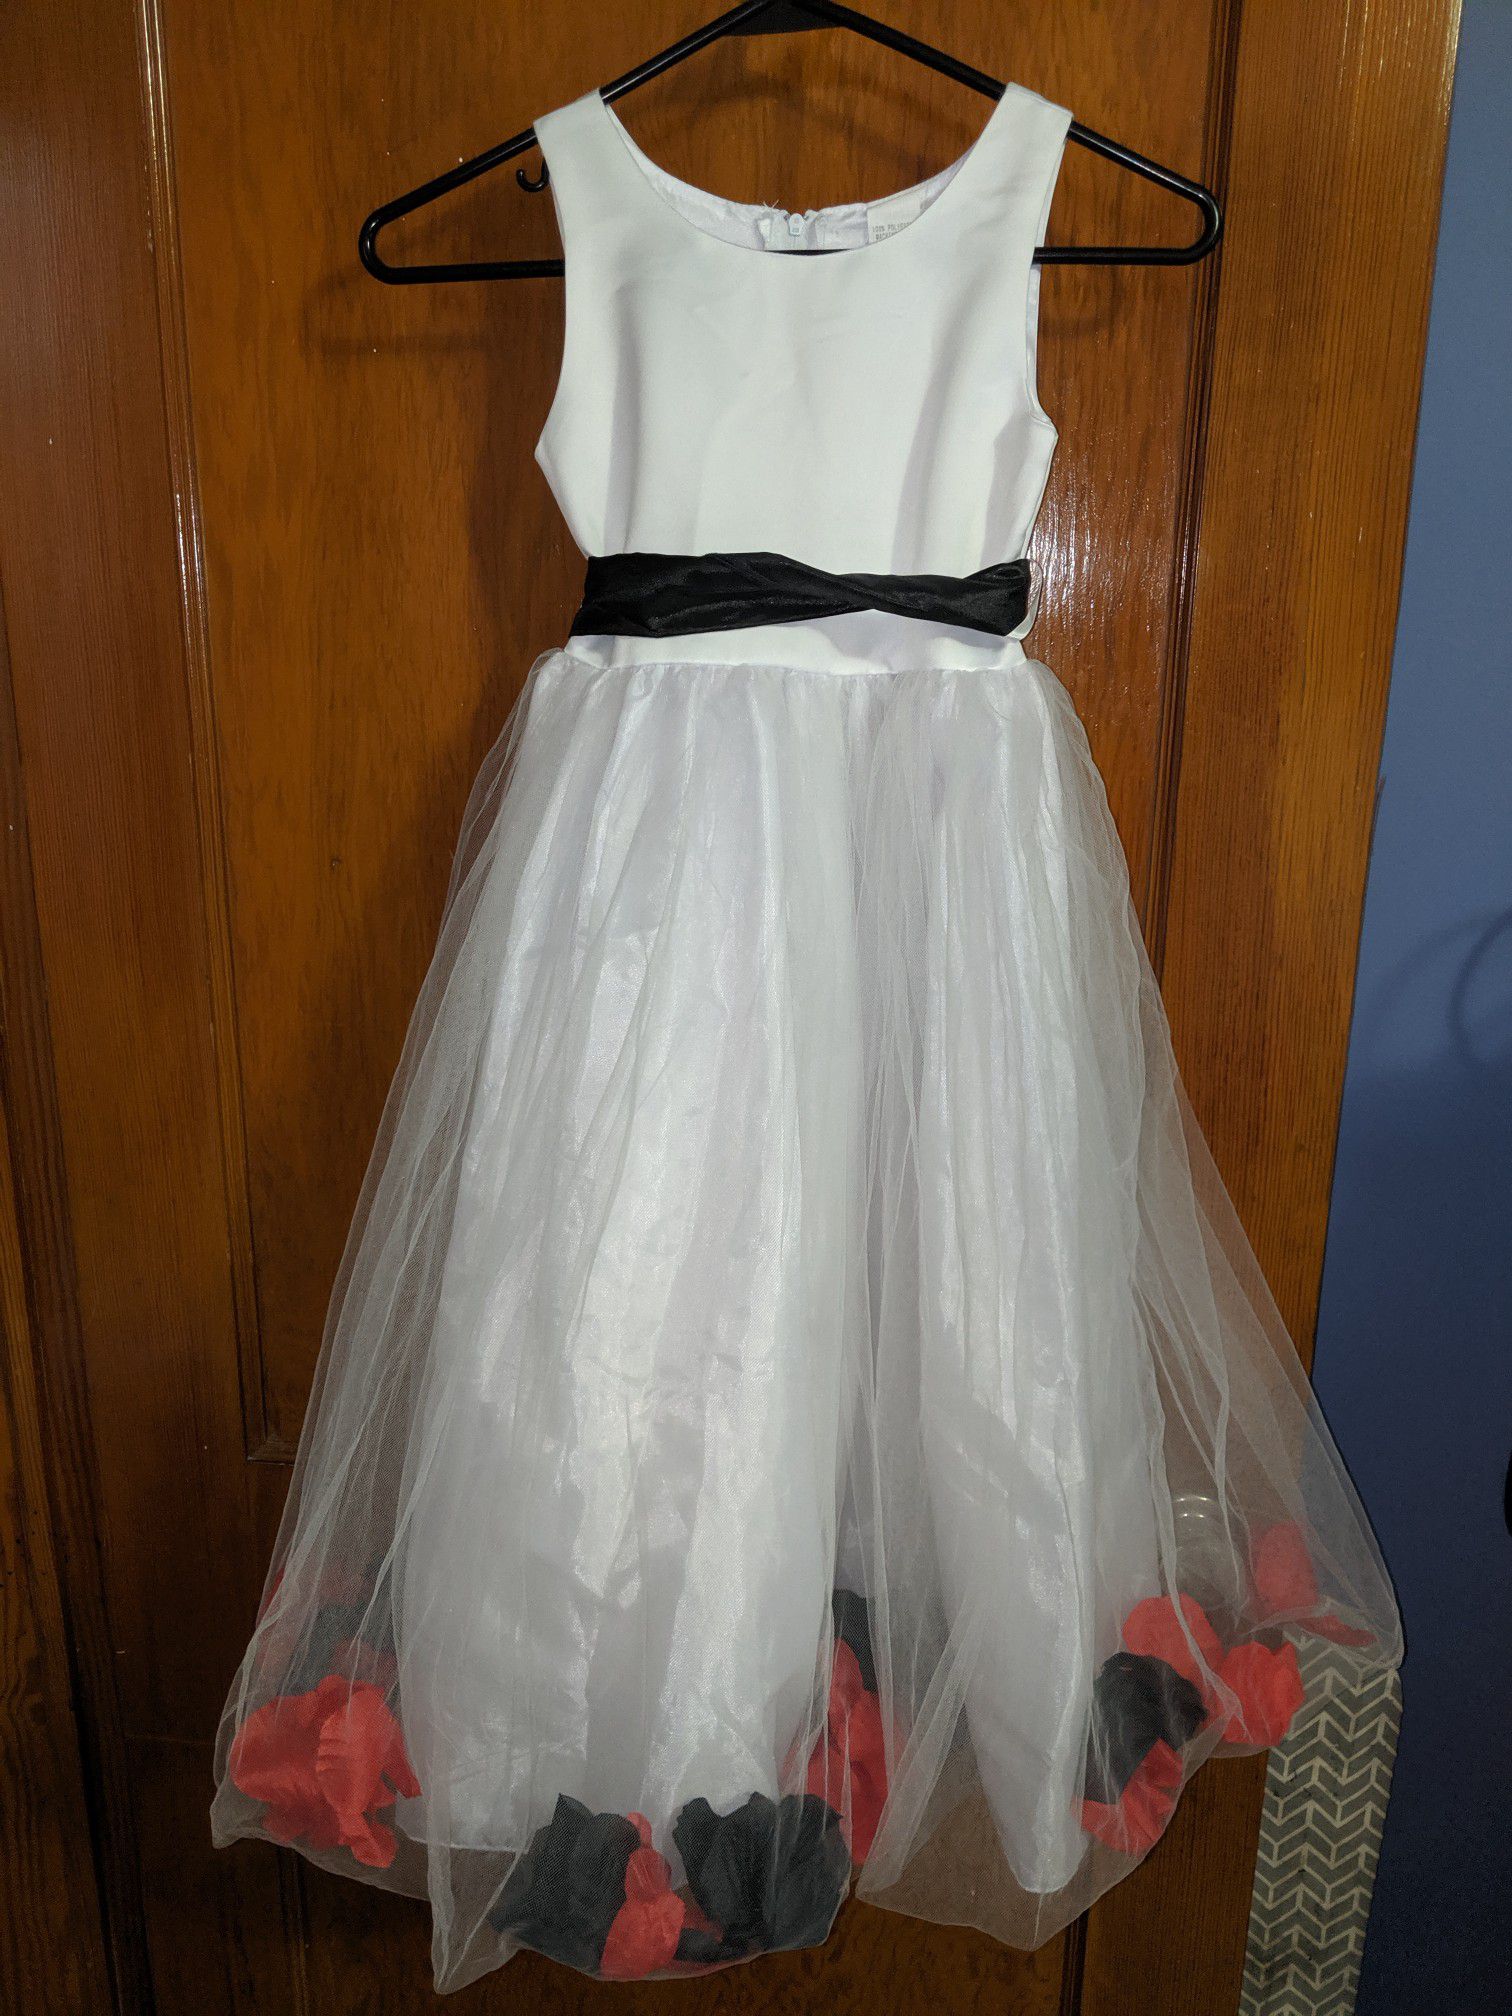 NWT Flowers girl dress with flower petals 6